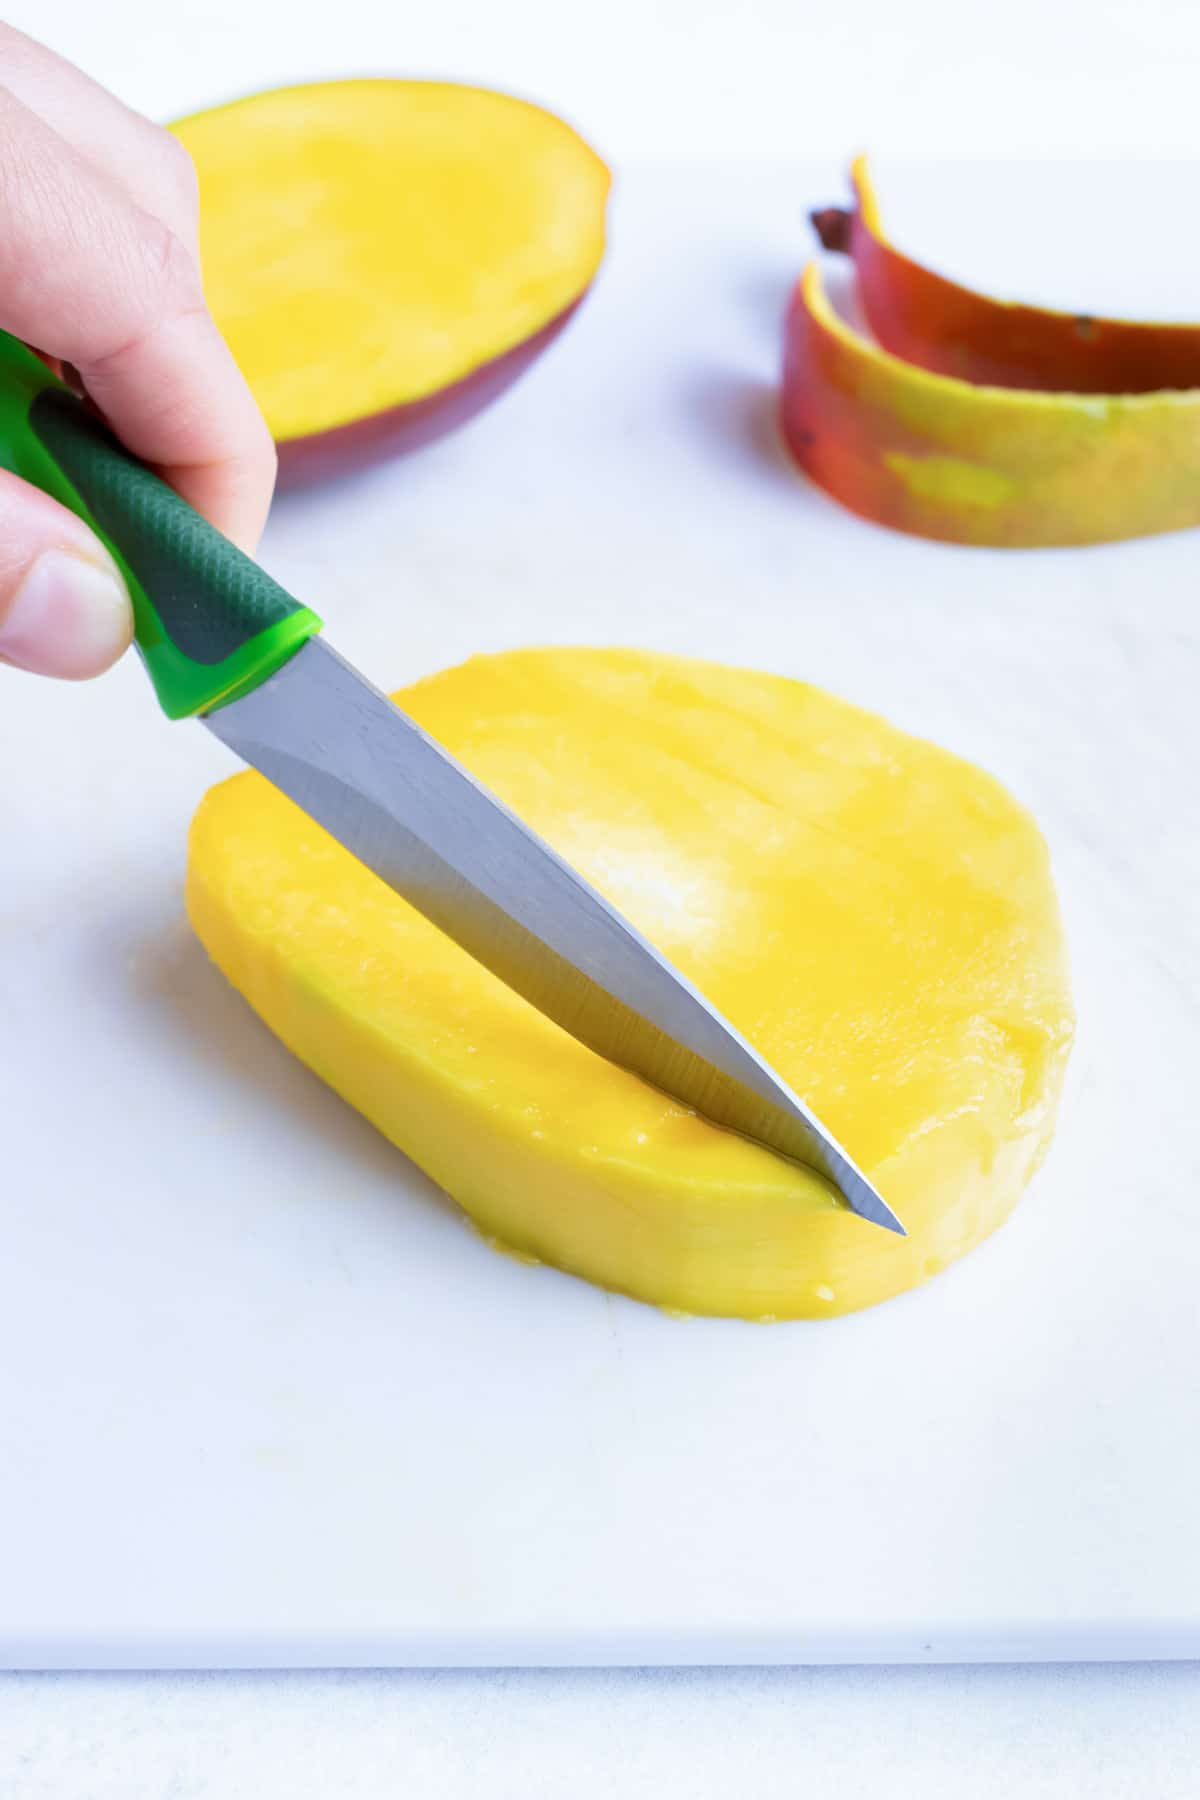 A small paring knife removes the edible mango from around the pit.